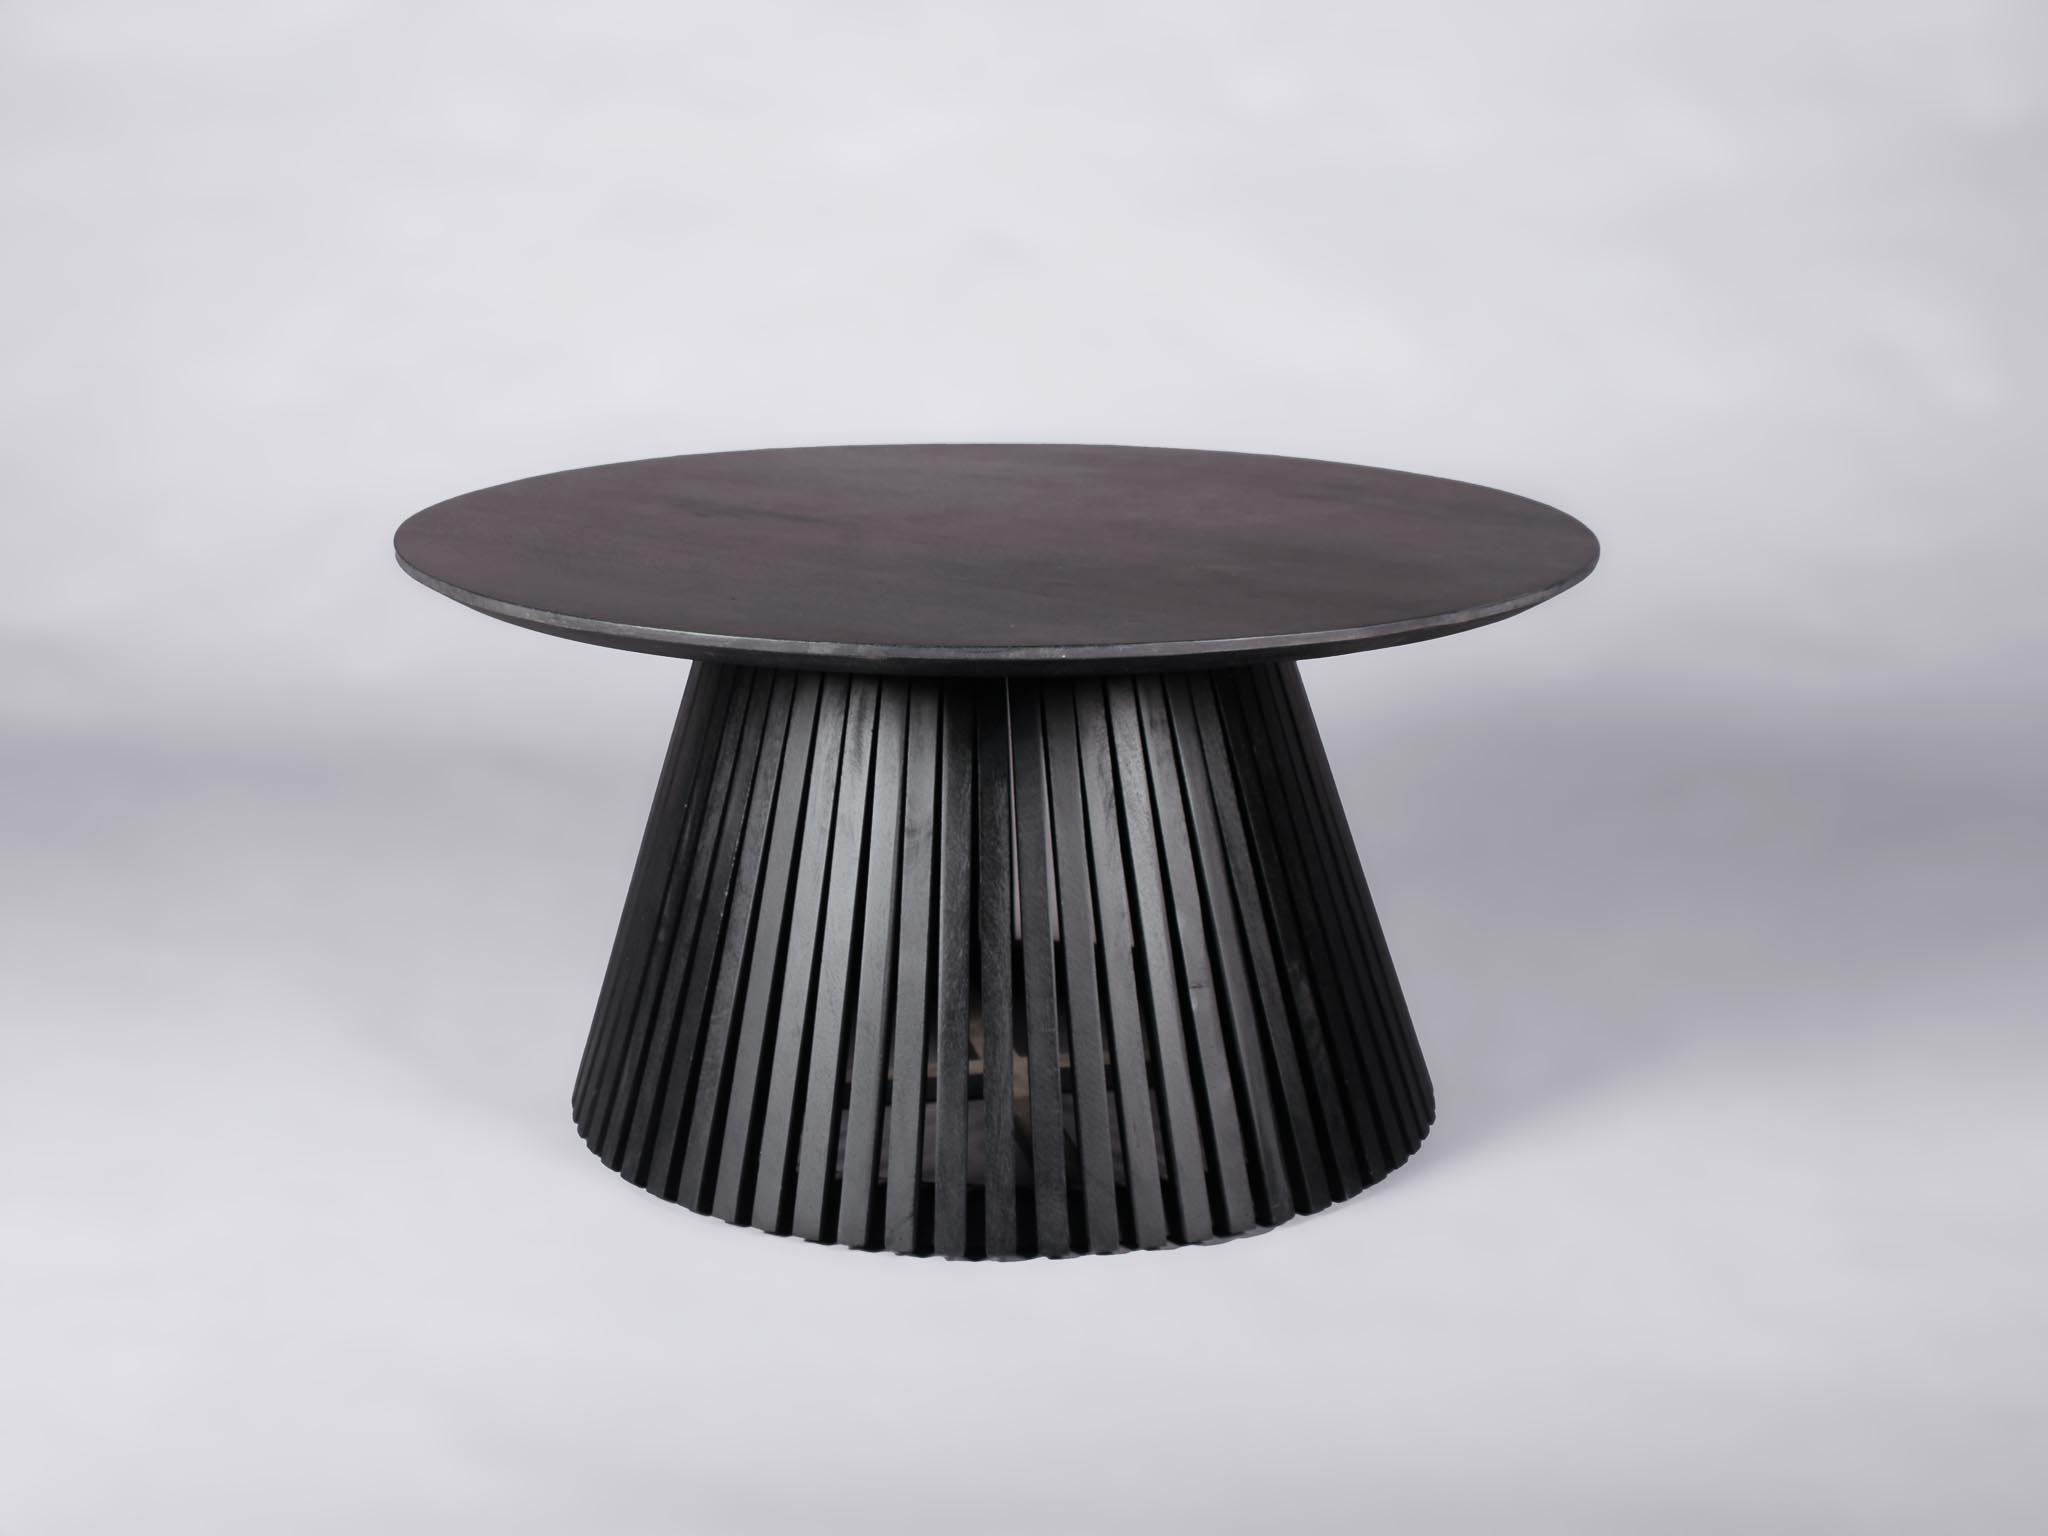 The Nara Coffee table in black perfectly blends scandinavian functionality and Japanese design.